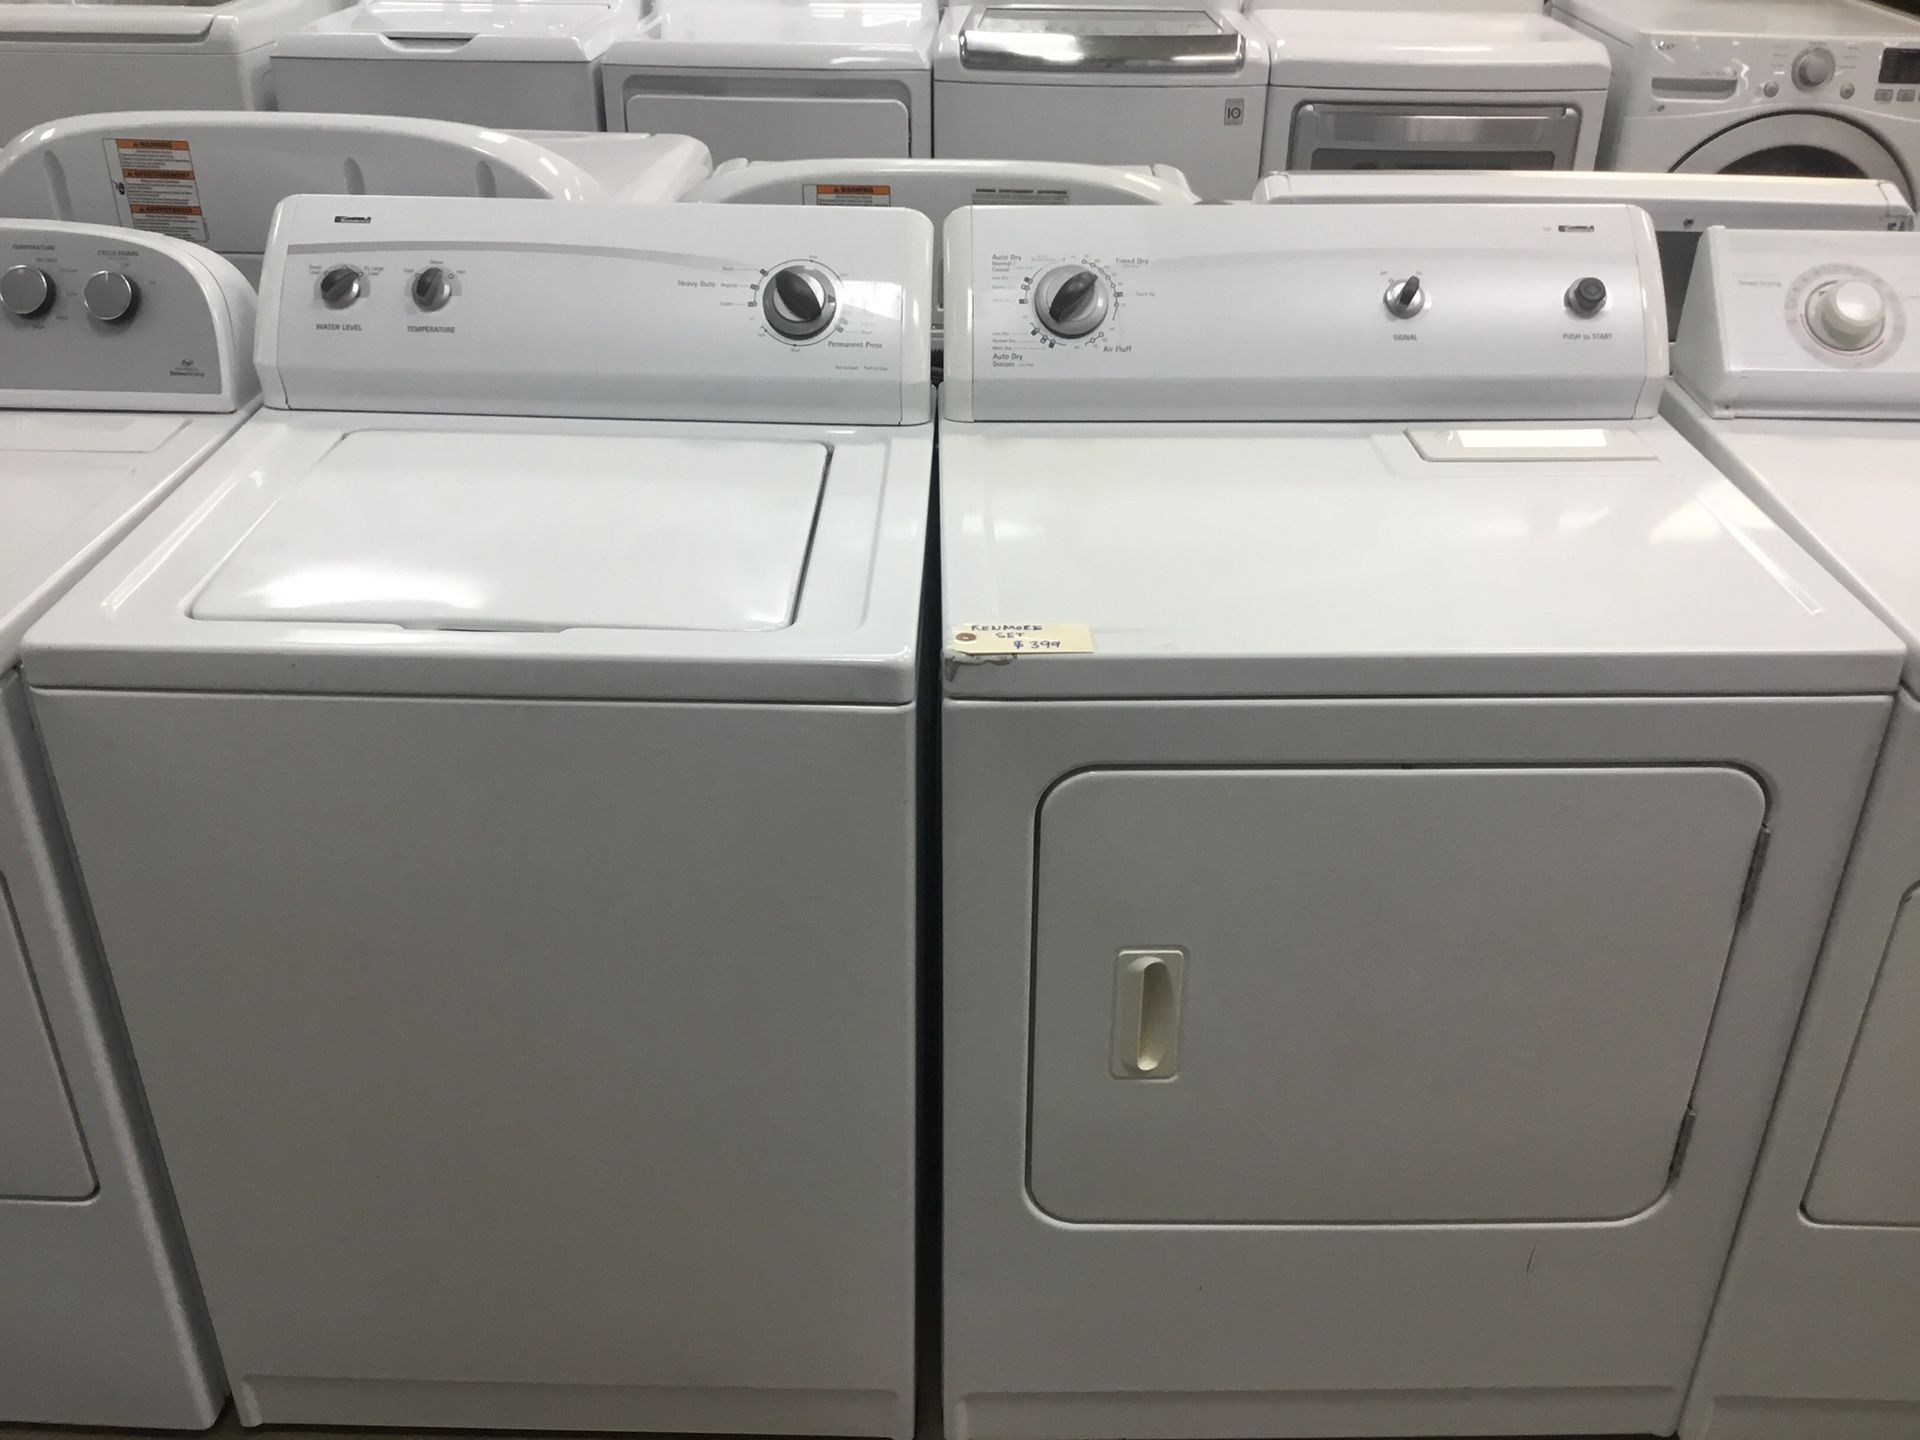 KEMORE WASHER/ DRYER for Sale in Indianapolis, IN - OfferUp